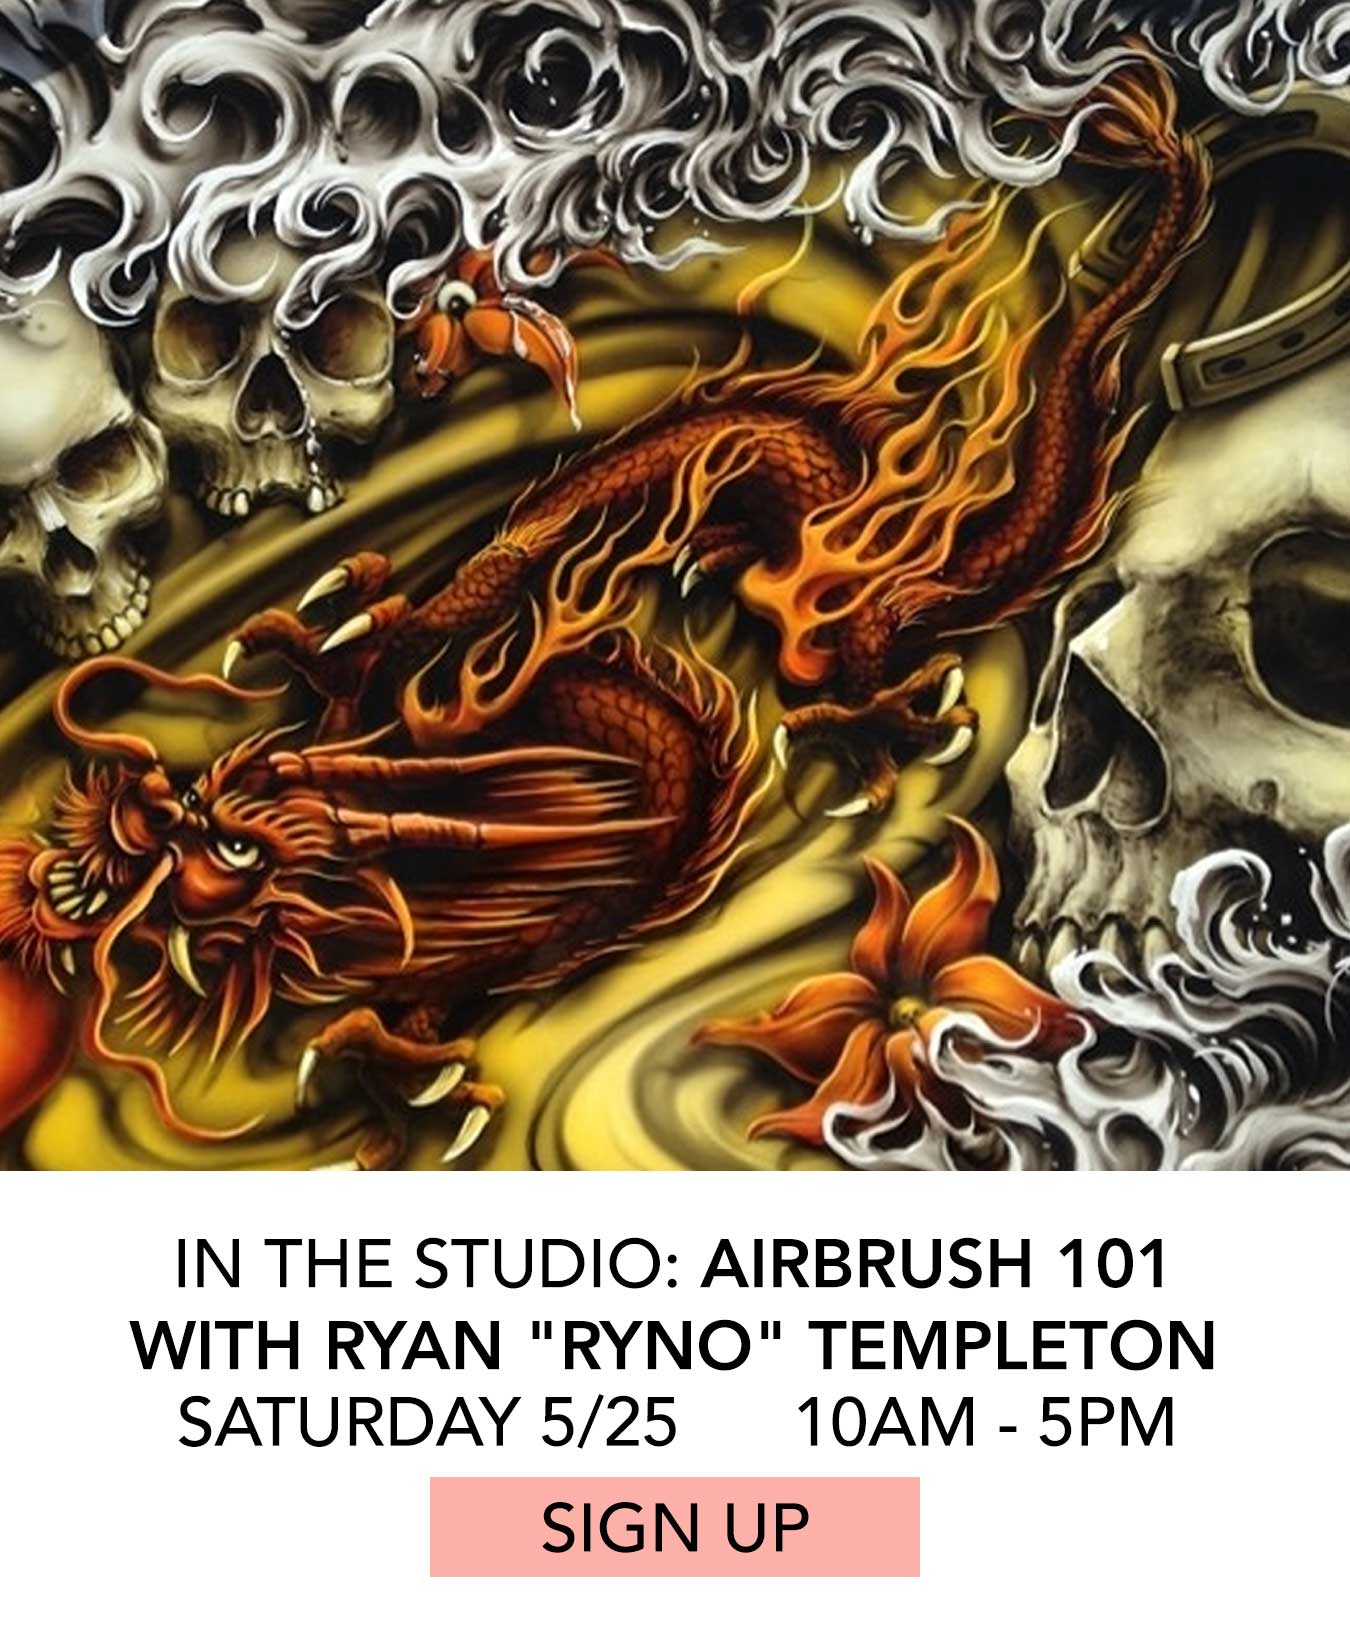 In the Studio: Airbrush 101 with Ryan Ryno Templeton. Saturday 5/25 from 10:00am to 5:00pm. Click to Sign Up.